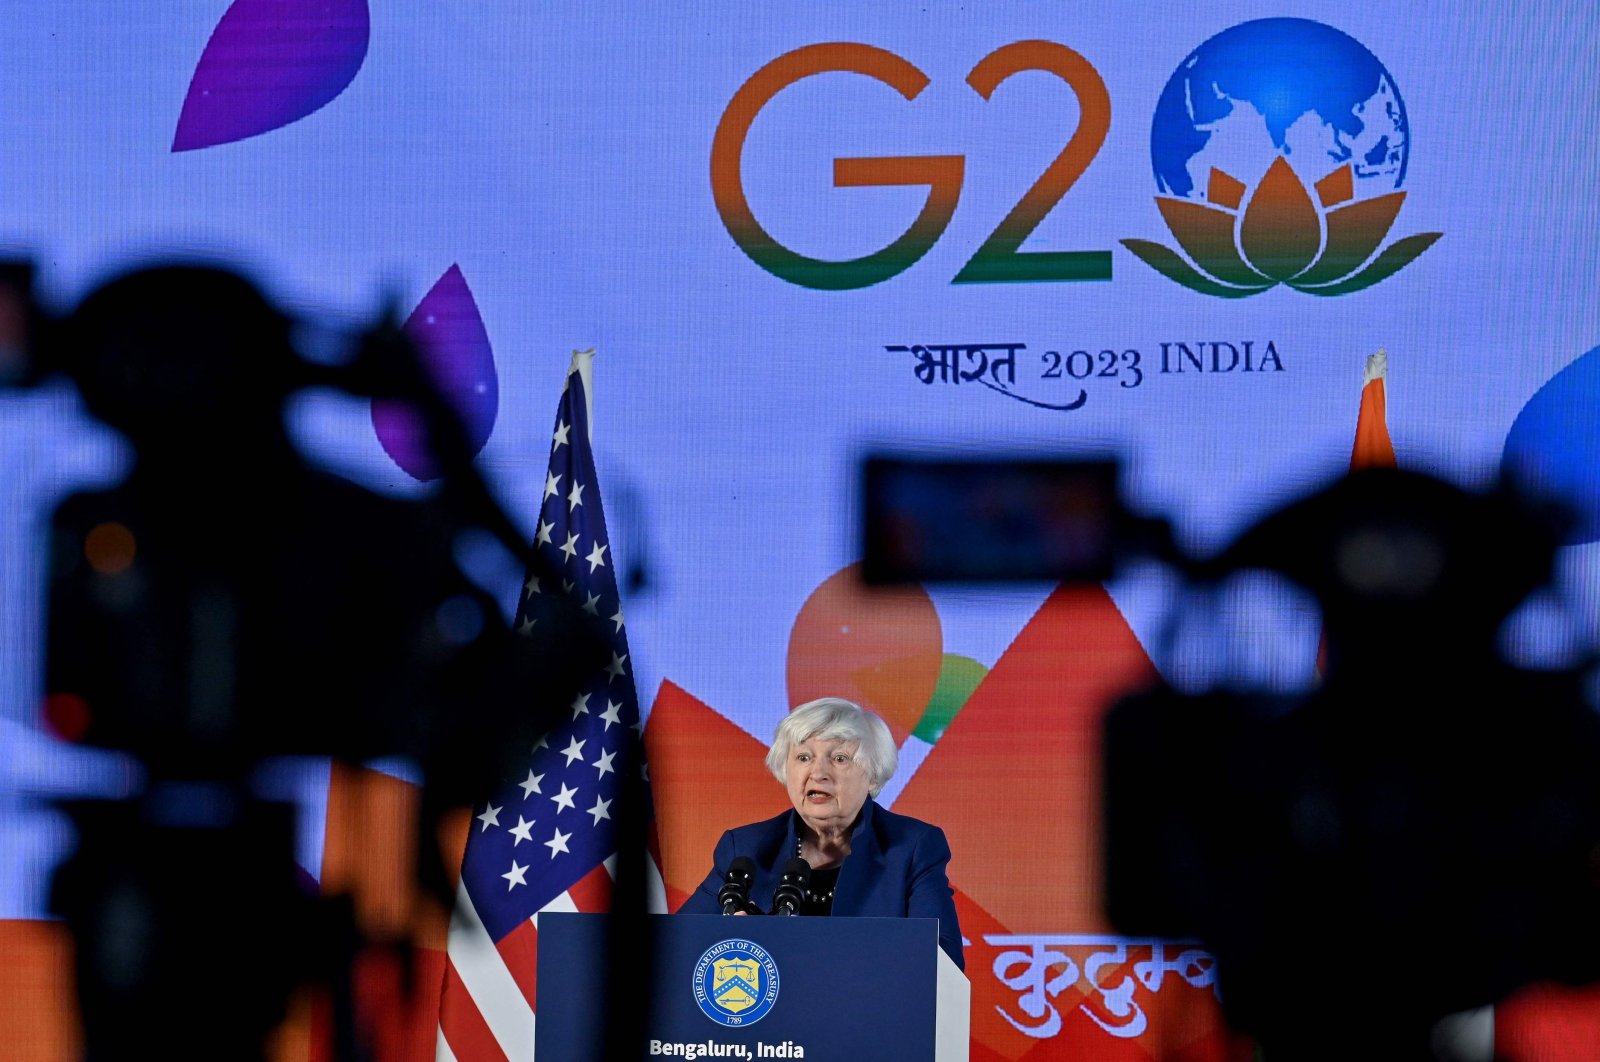 United States&#039; Secretary of Treasury, Janet Yellen addresses the media during a news conference at the G20 Presidency in Bengaluru, India, Feb. 23, 2023. (AFP Photo)